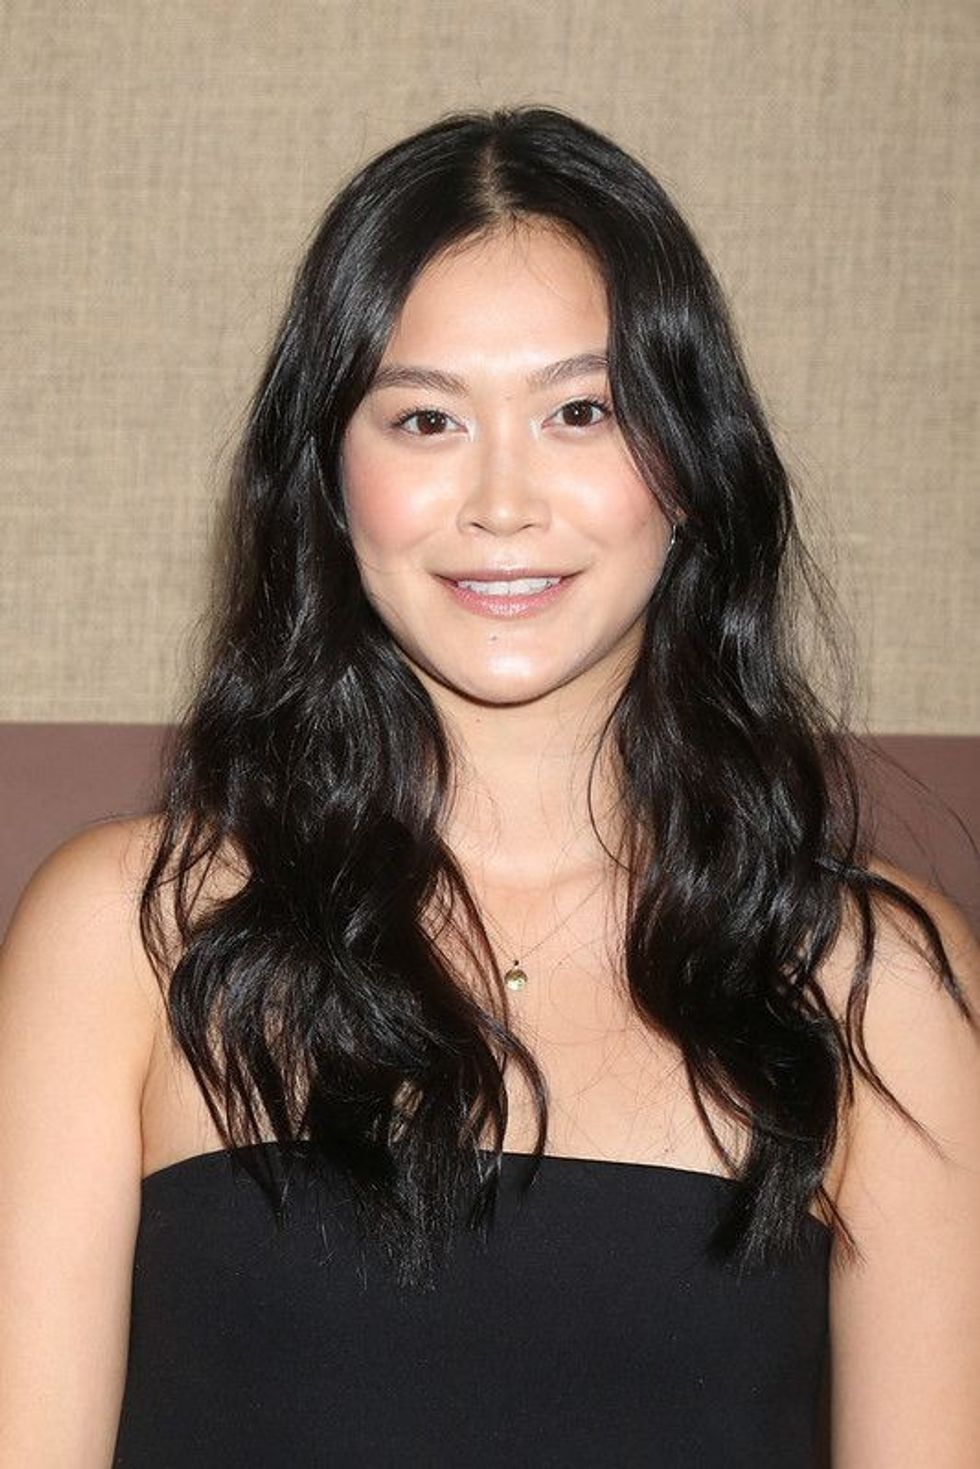 Read more about Disney actress Dianne Doan's family life, biography, and acting career